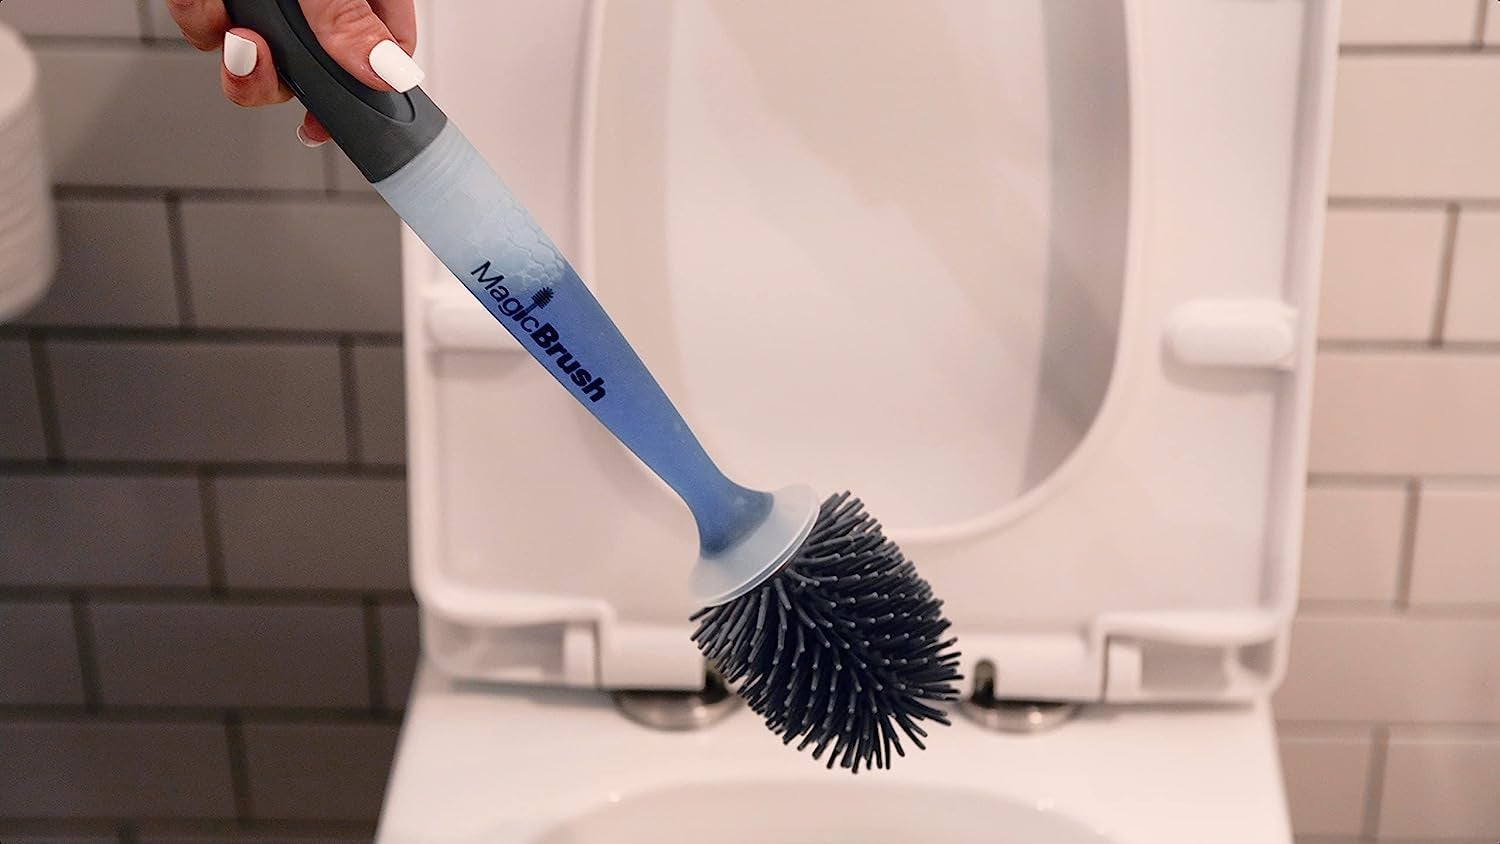 No joke, this Rubbermaid 'electric toothbrush' for cleaning